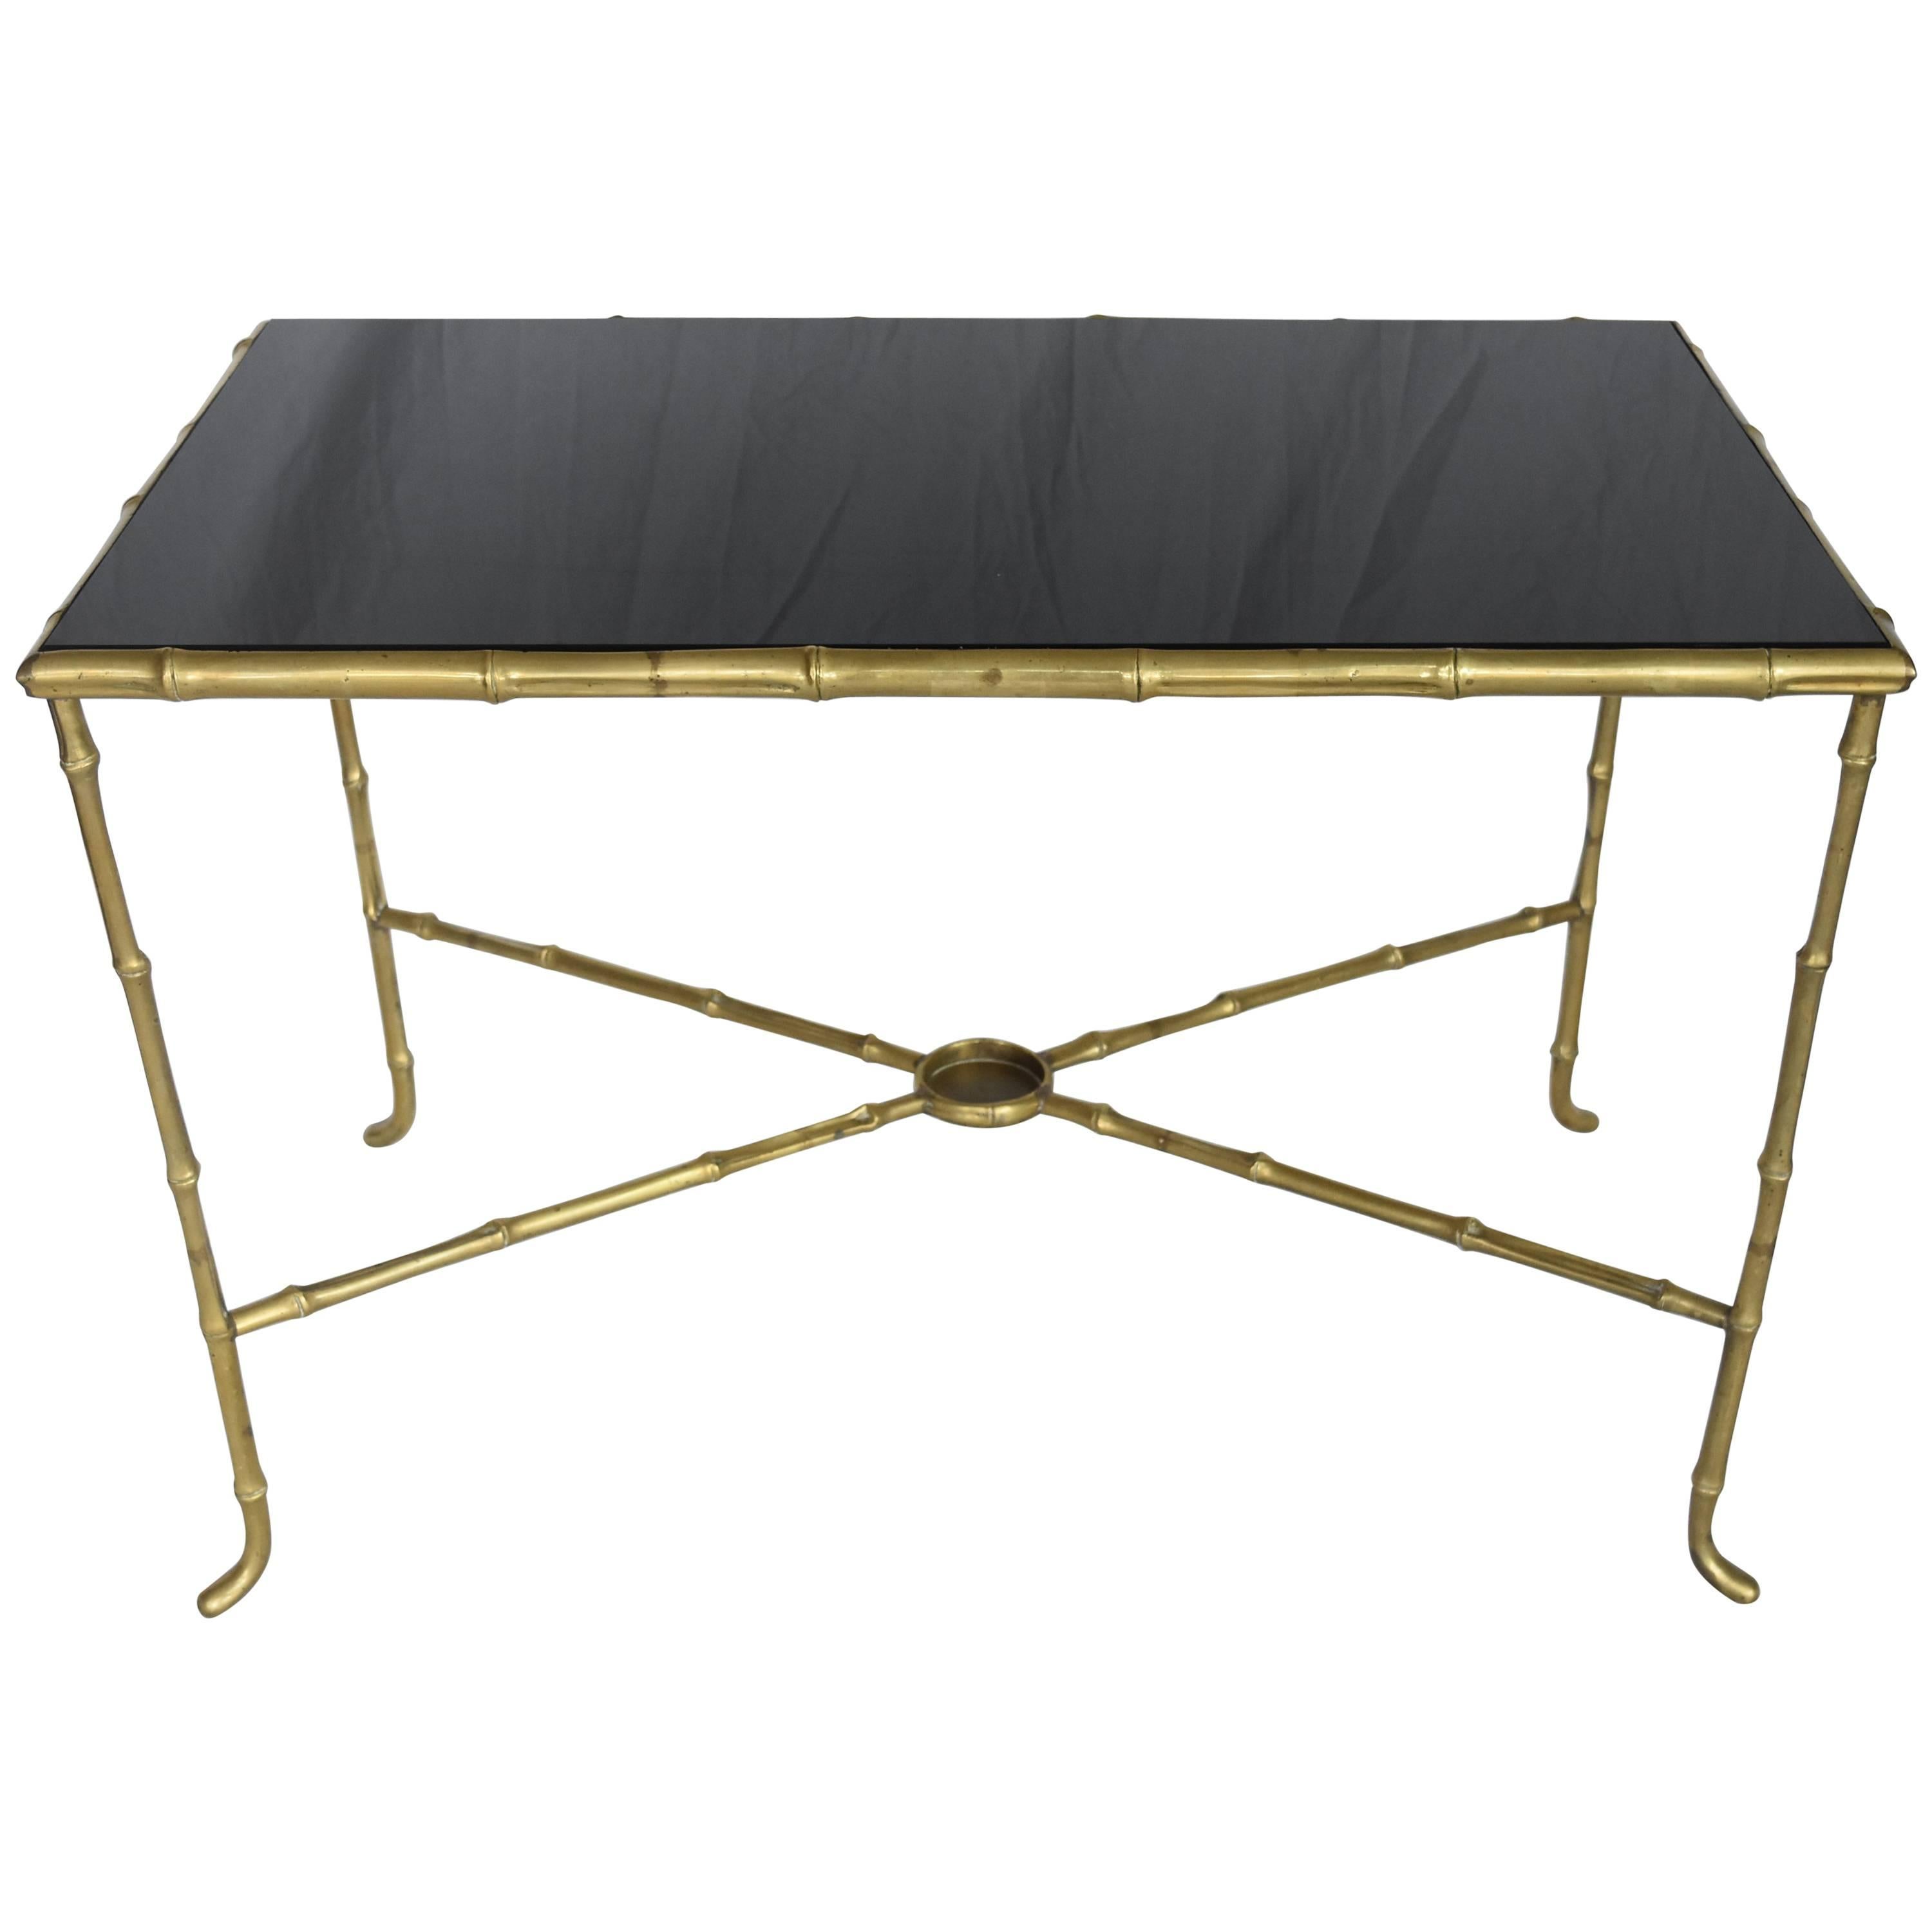 French Midcentury Brass Faux Bamboo Table with Black Glass Top